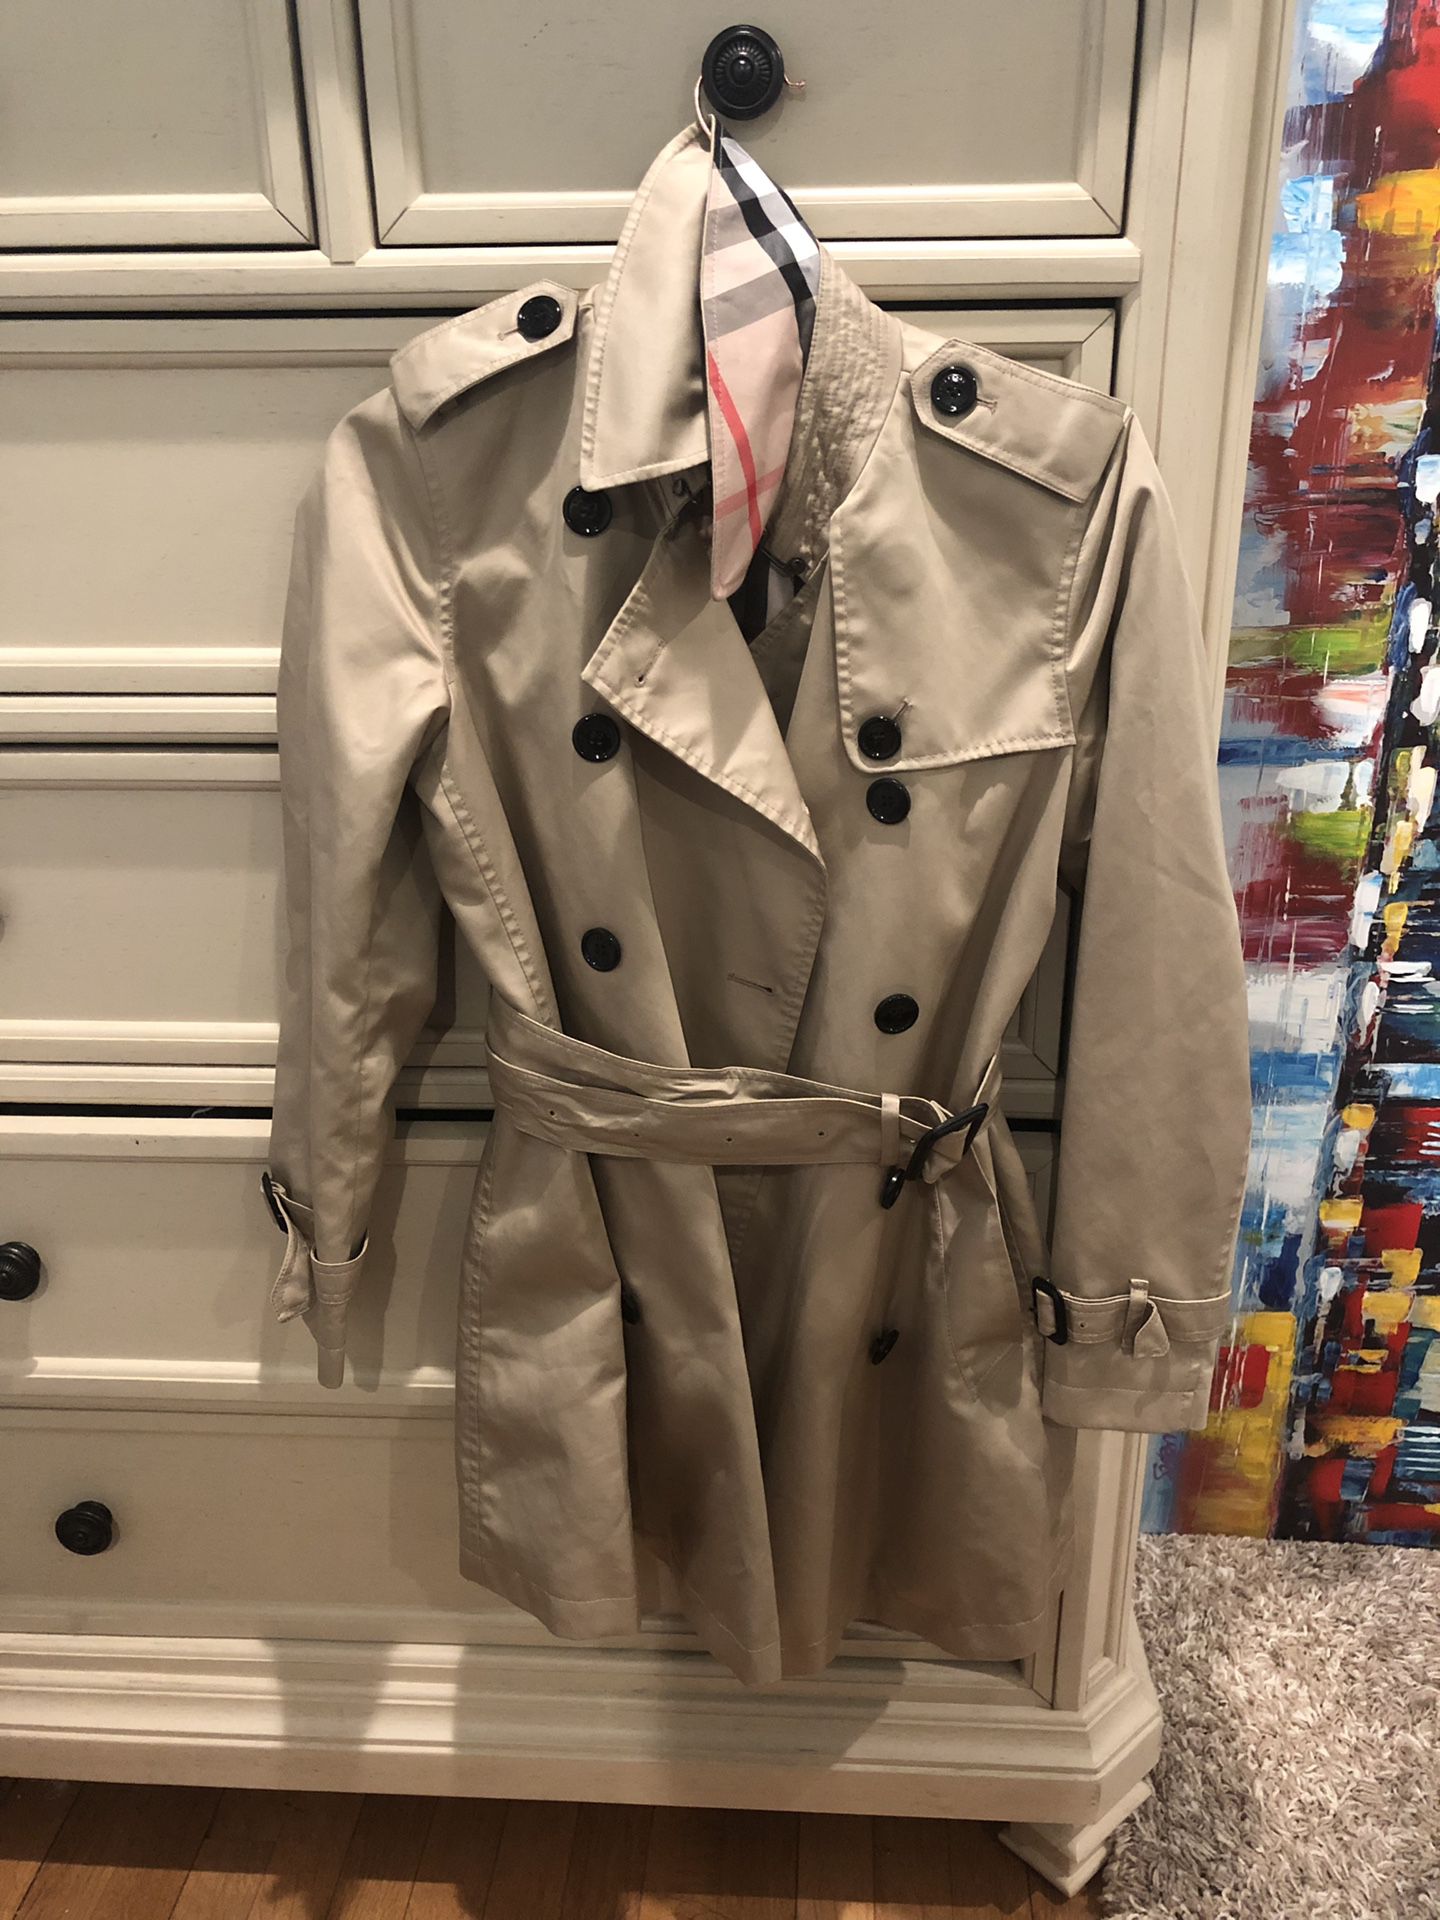 Burberry Women’s Trench Coat with Lining size US 4 UK 5 petite